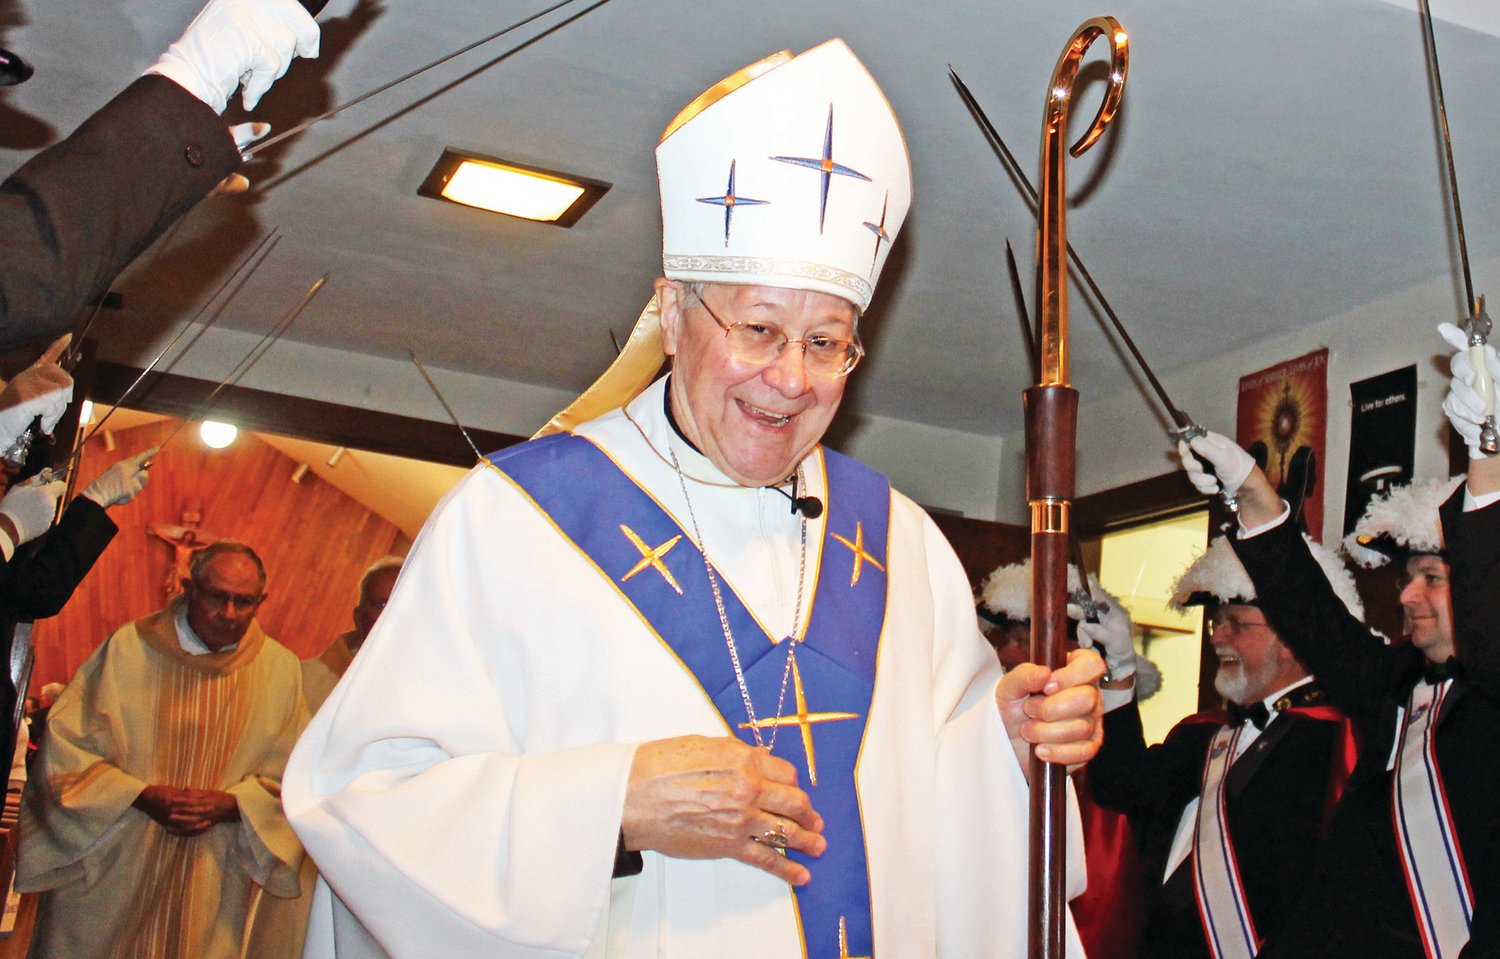 Bishop Emeritus John R. Gaydos processes out of Immaculate Conception Church in Macon in this file photo from December 2017, near the conclusion of his 19-year tenure as third bishop of the Jefferson City diocese. He was ordained and installed 25 years ago, on Aug. 27, 1997, and served until Bishop W. Shawn McKnight was ordained and installed on Feb. 8, 2018.